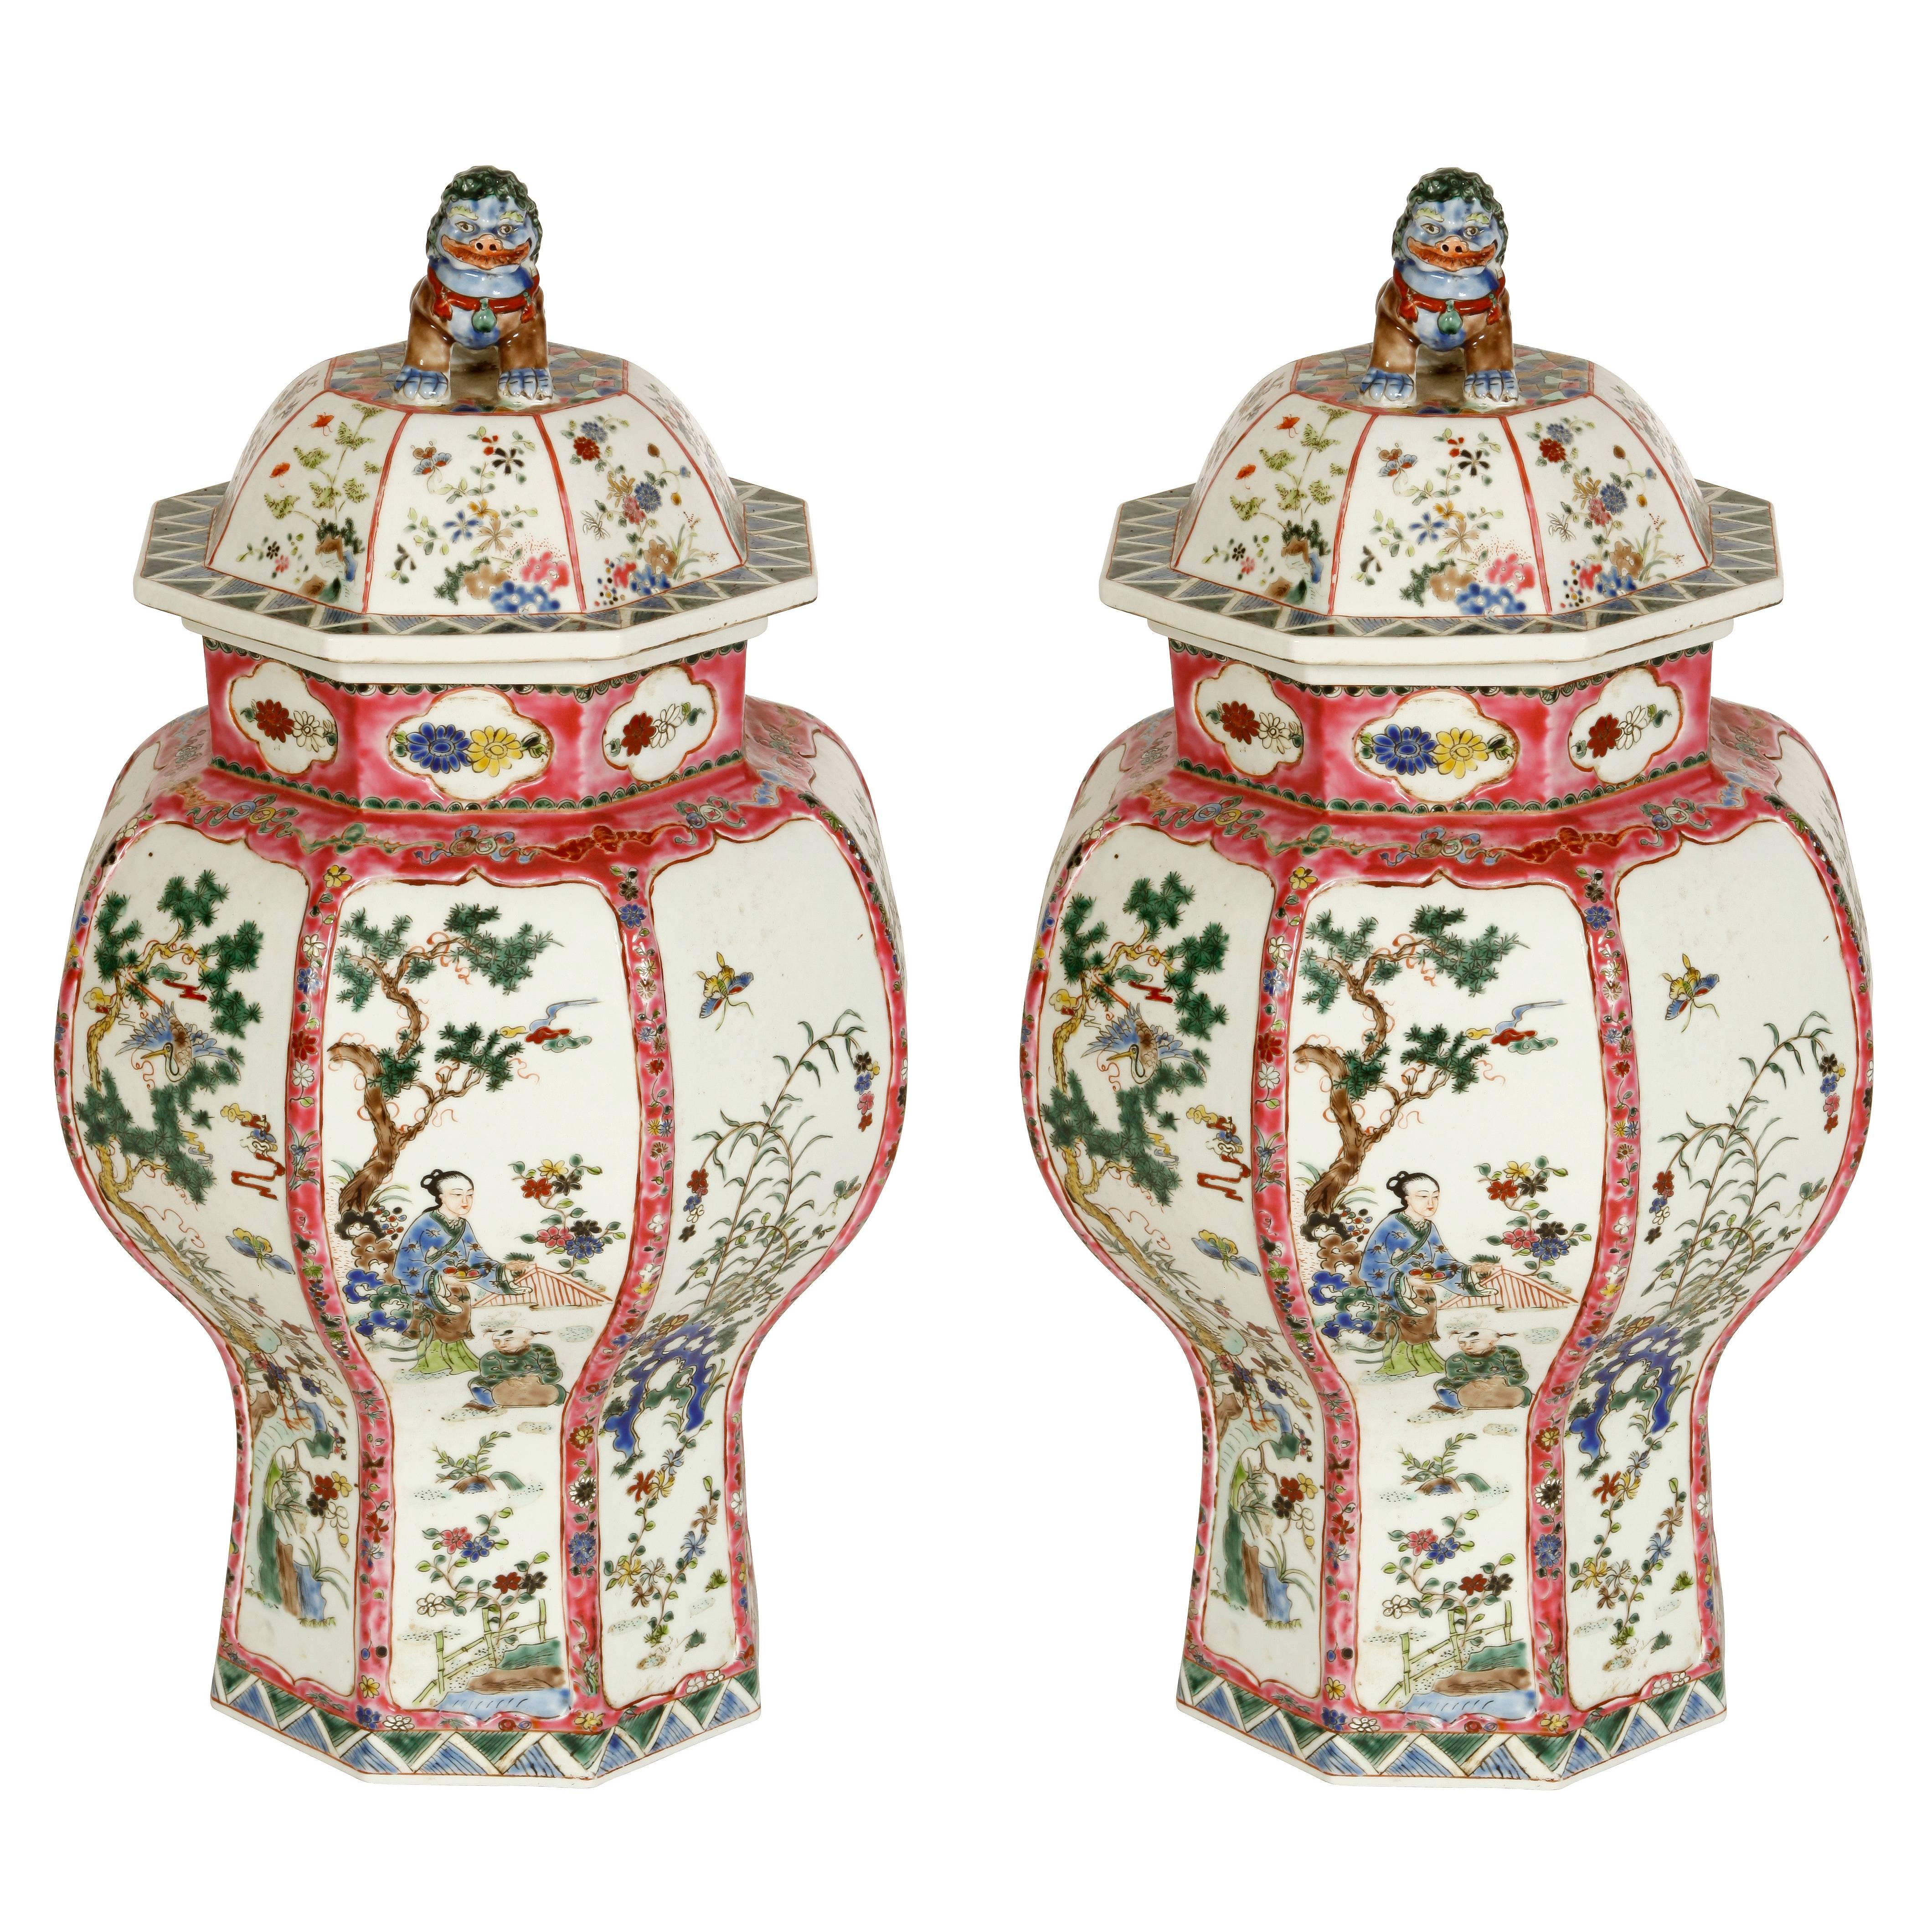 Pair of Antique Chinese Famille Rose Octagonal Covered Jars